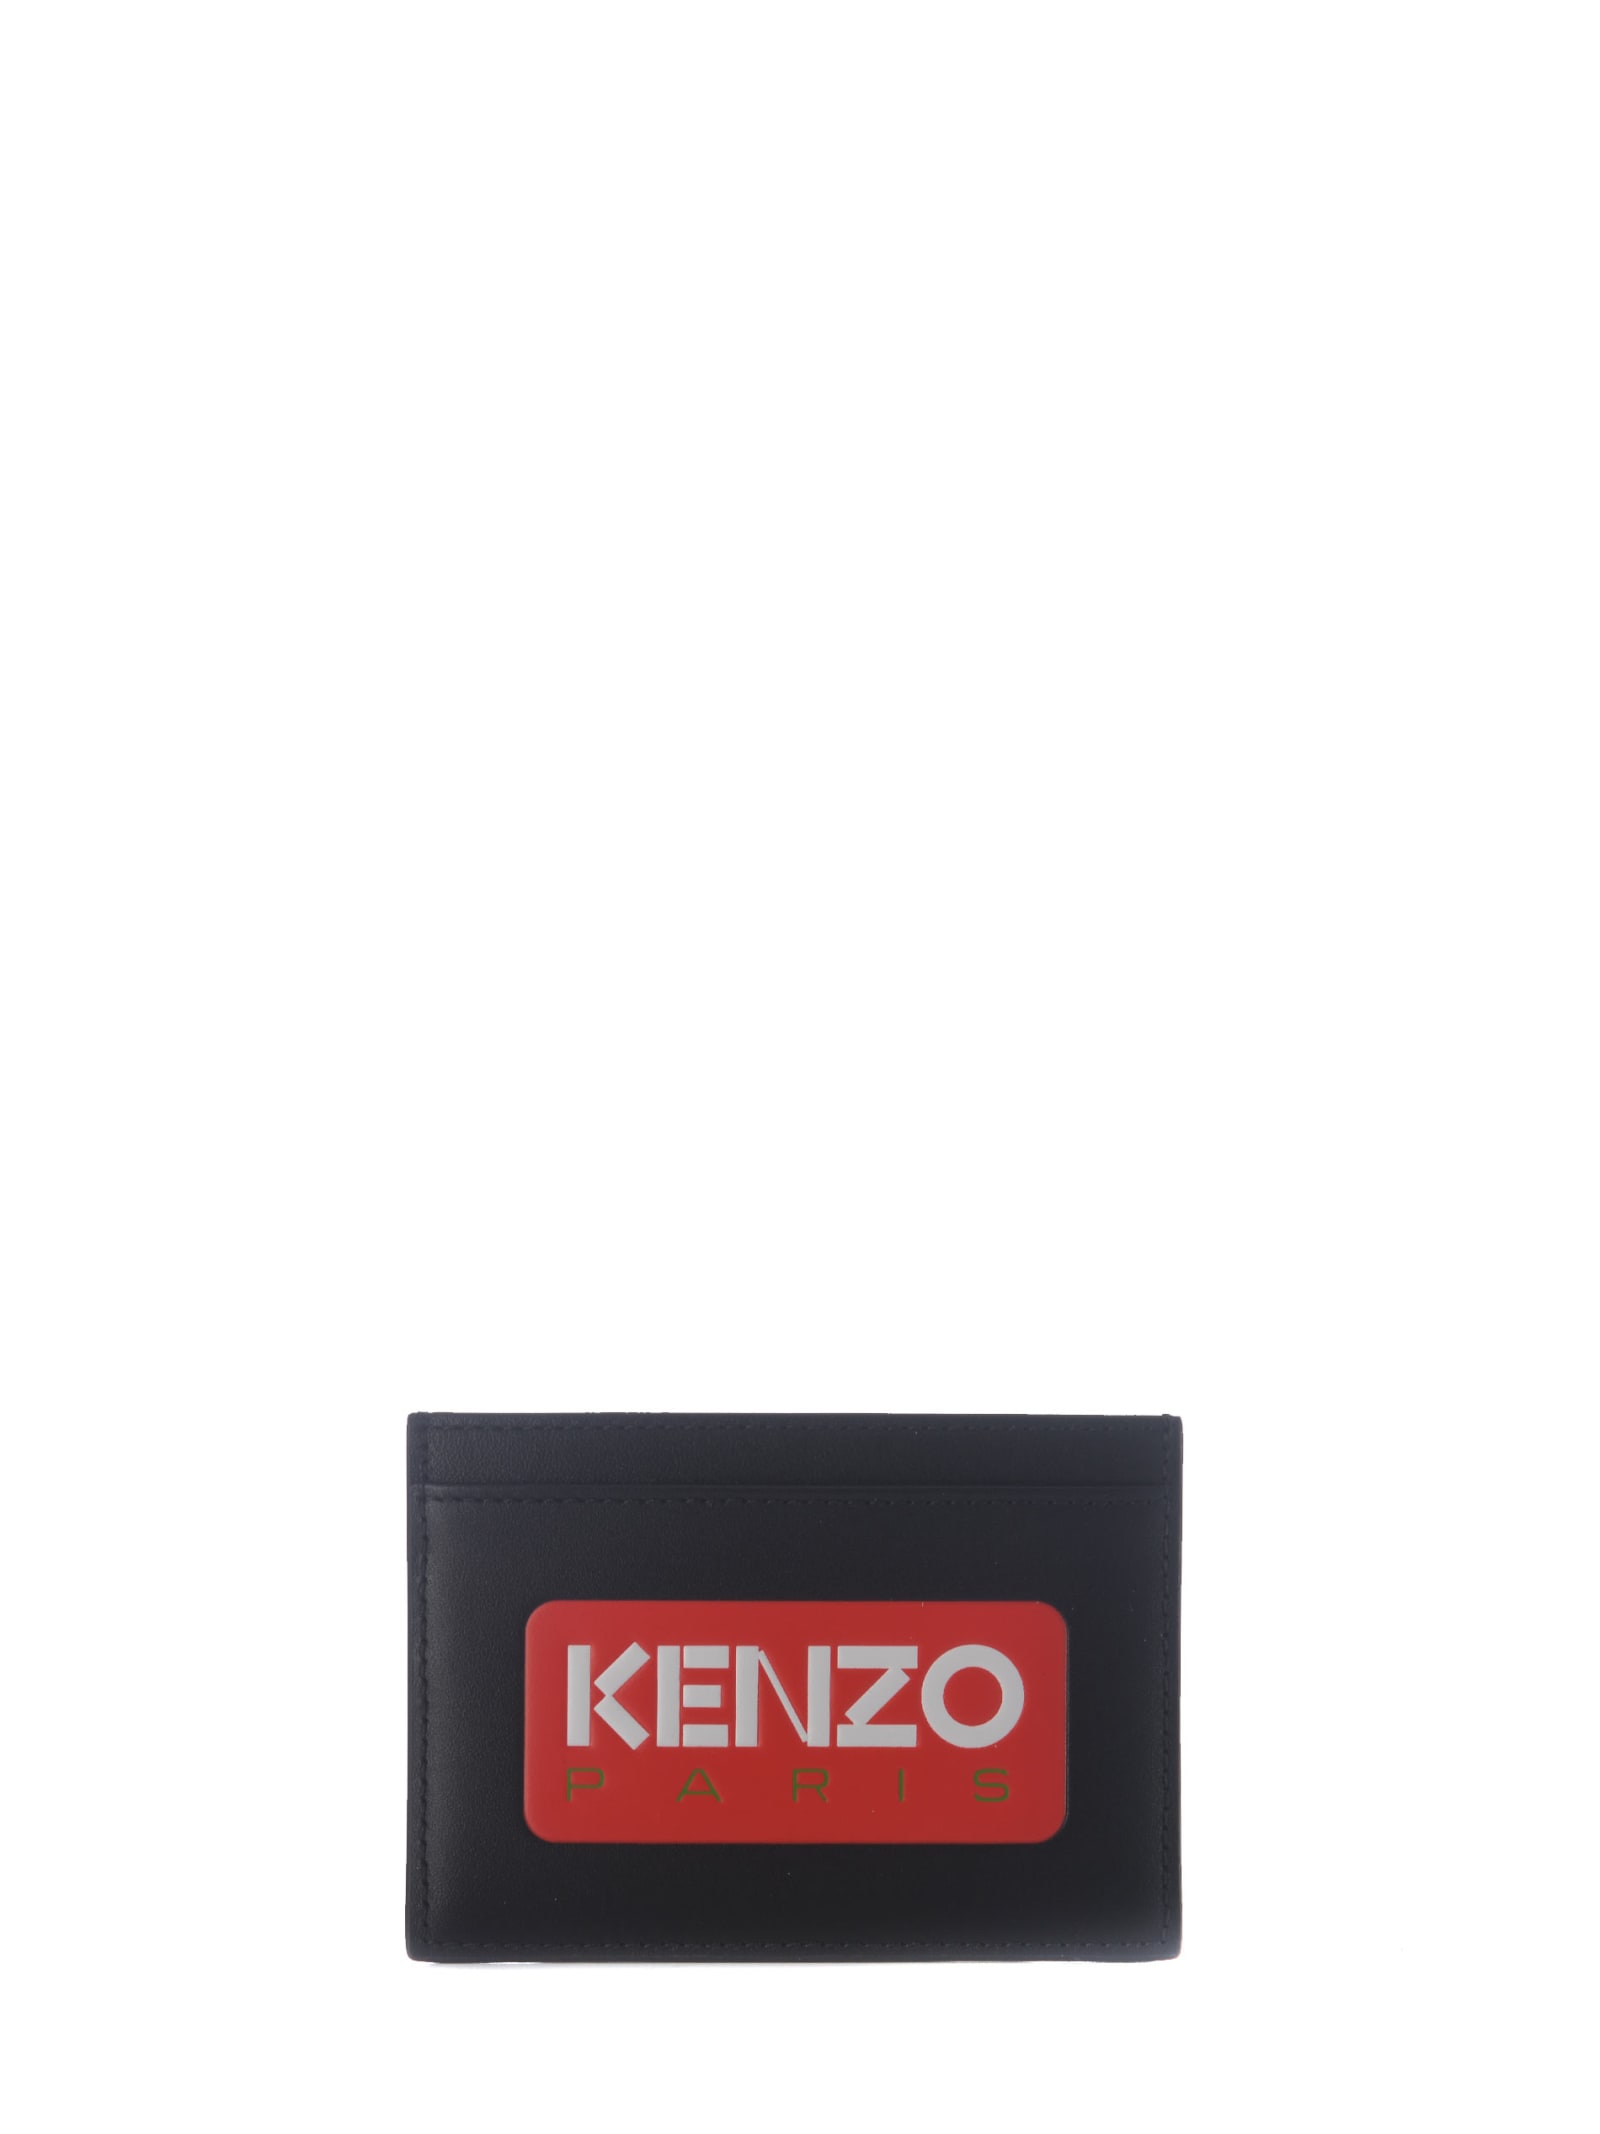 Kenzo Card Holder   Paris In Leather In Nero